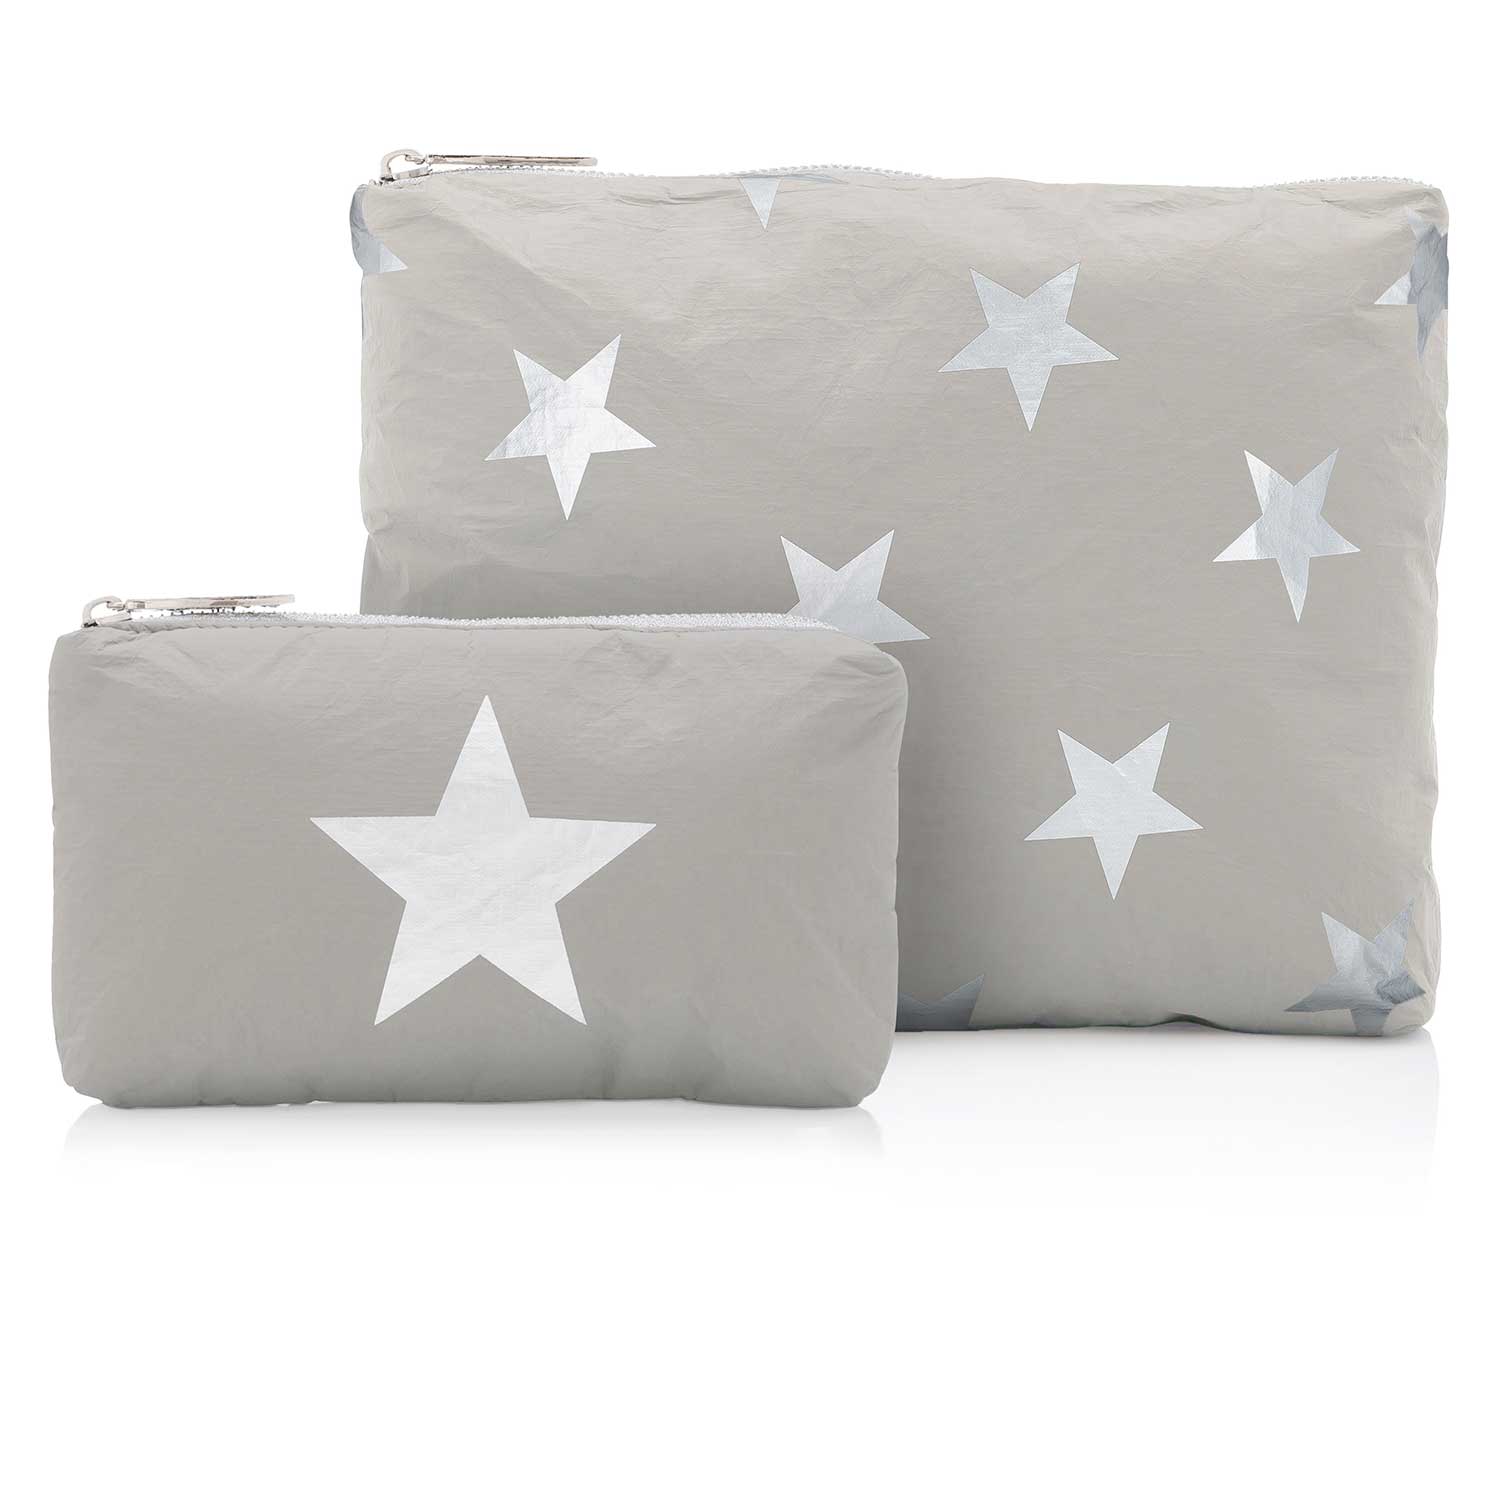 zipper packs in earth gray with silver stars